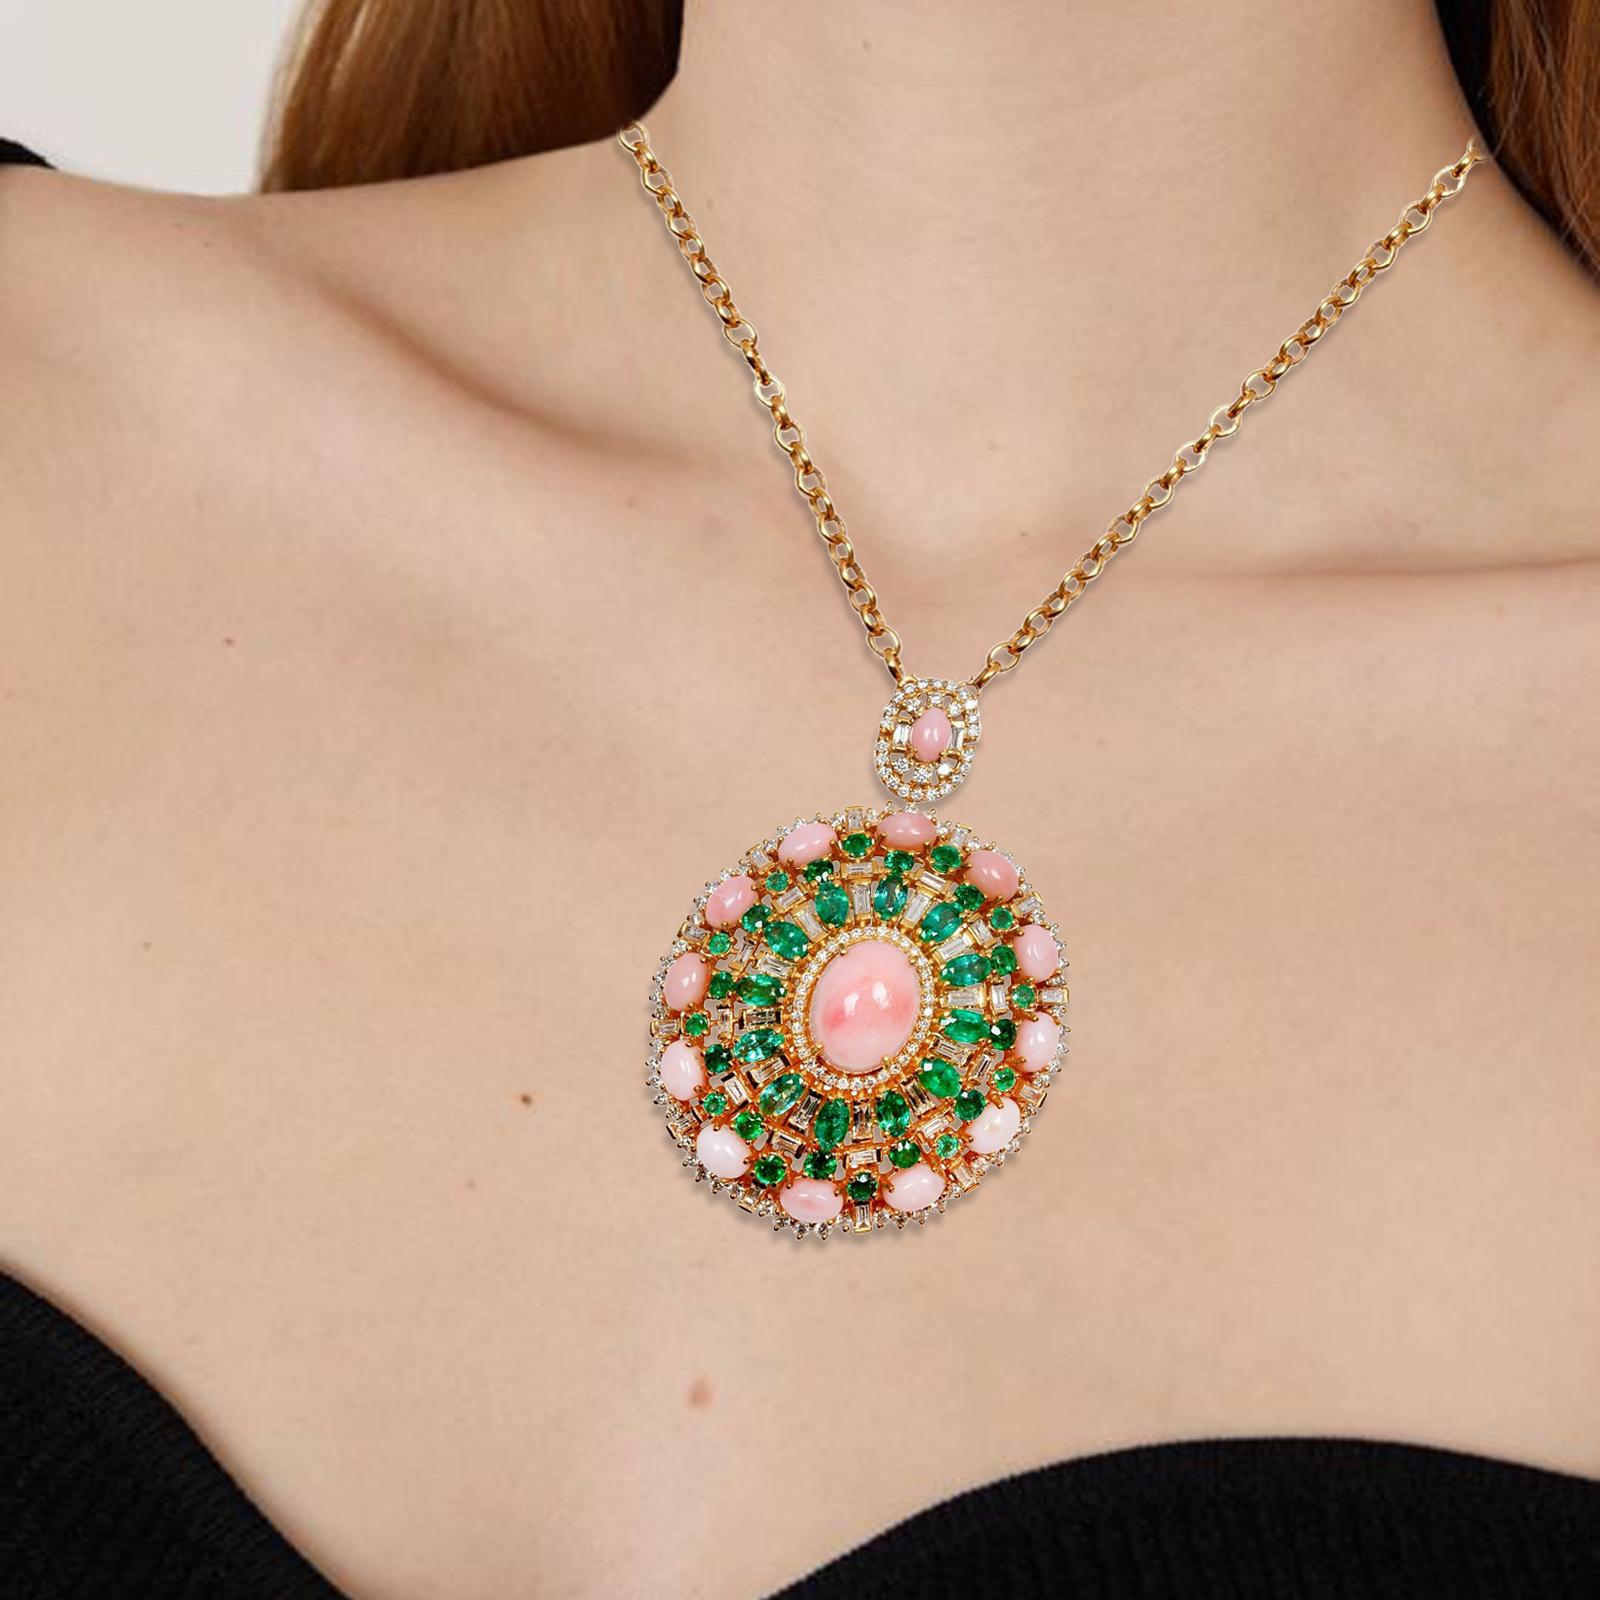 Cast from 14-karat gold, this pendant necklace is hand set with 16.40 carats pink opal, emerald and 4.40 carats of sparkling diamonds on the 29